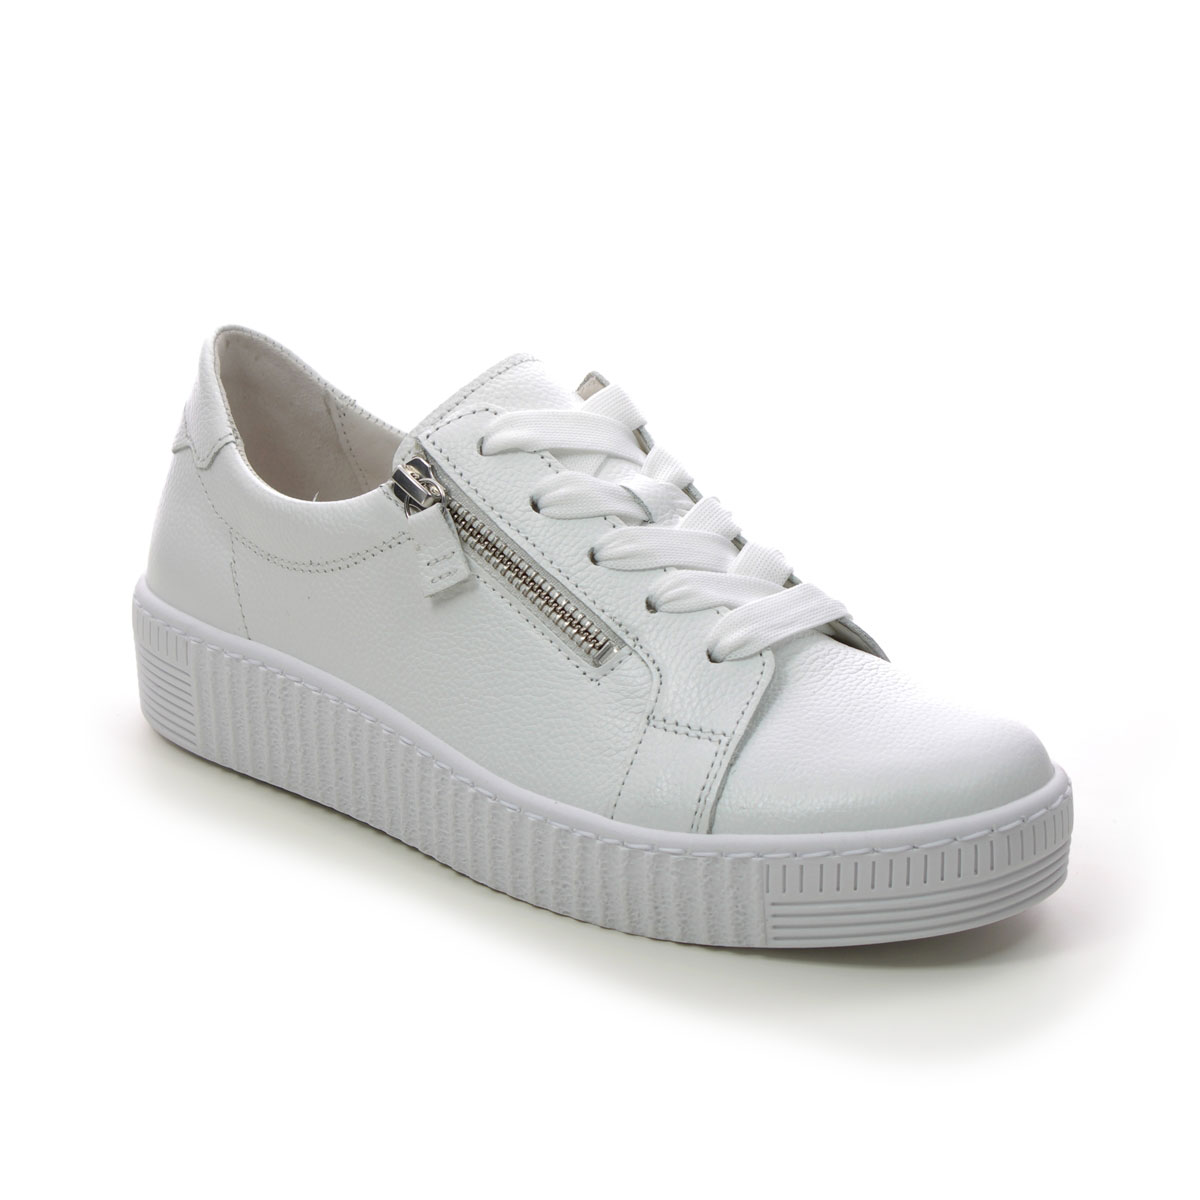 Gabor Wisdom White Leather Womens Trainers 23.334.21 In Size 8 In Plain White Leather  Womens Trainers In Soft White Leather Leather